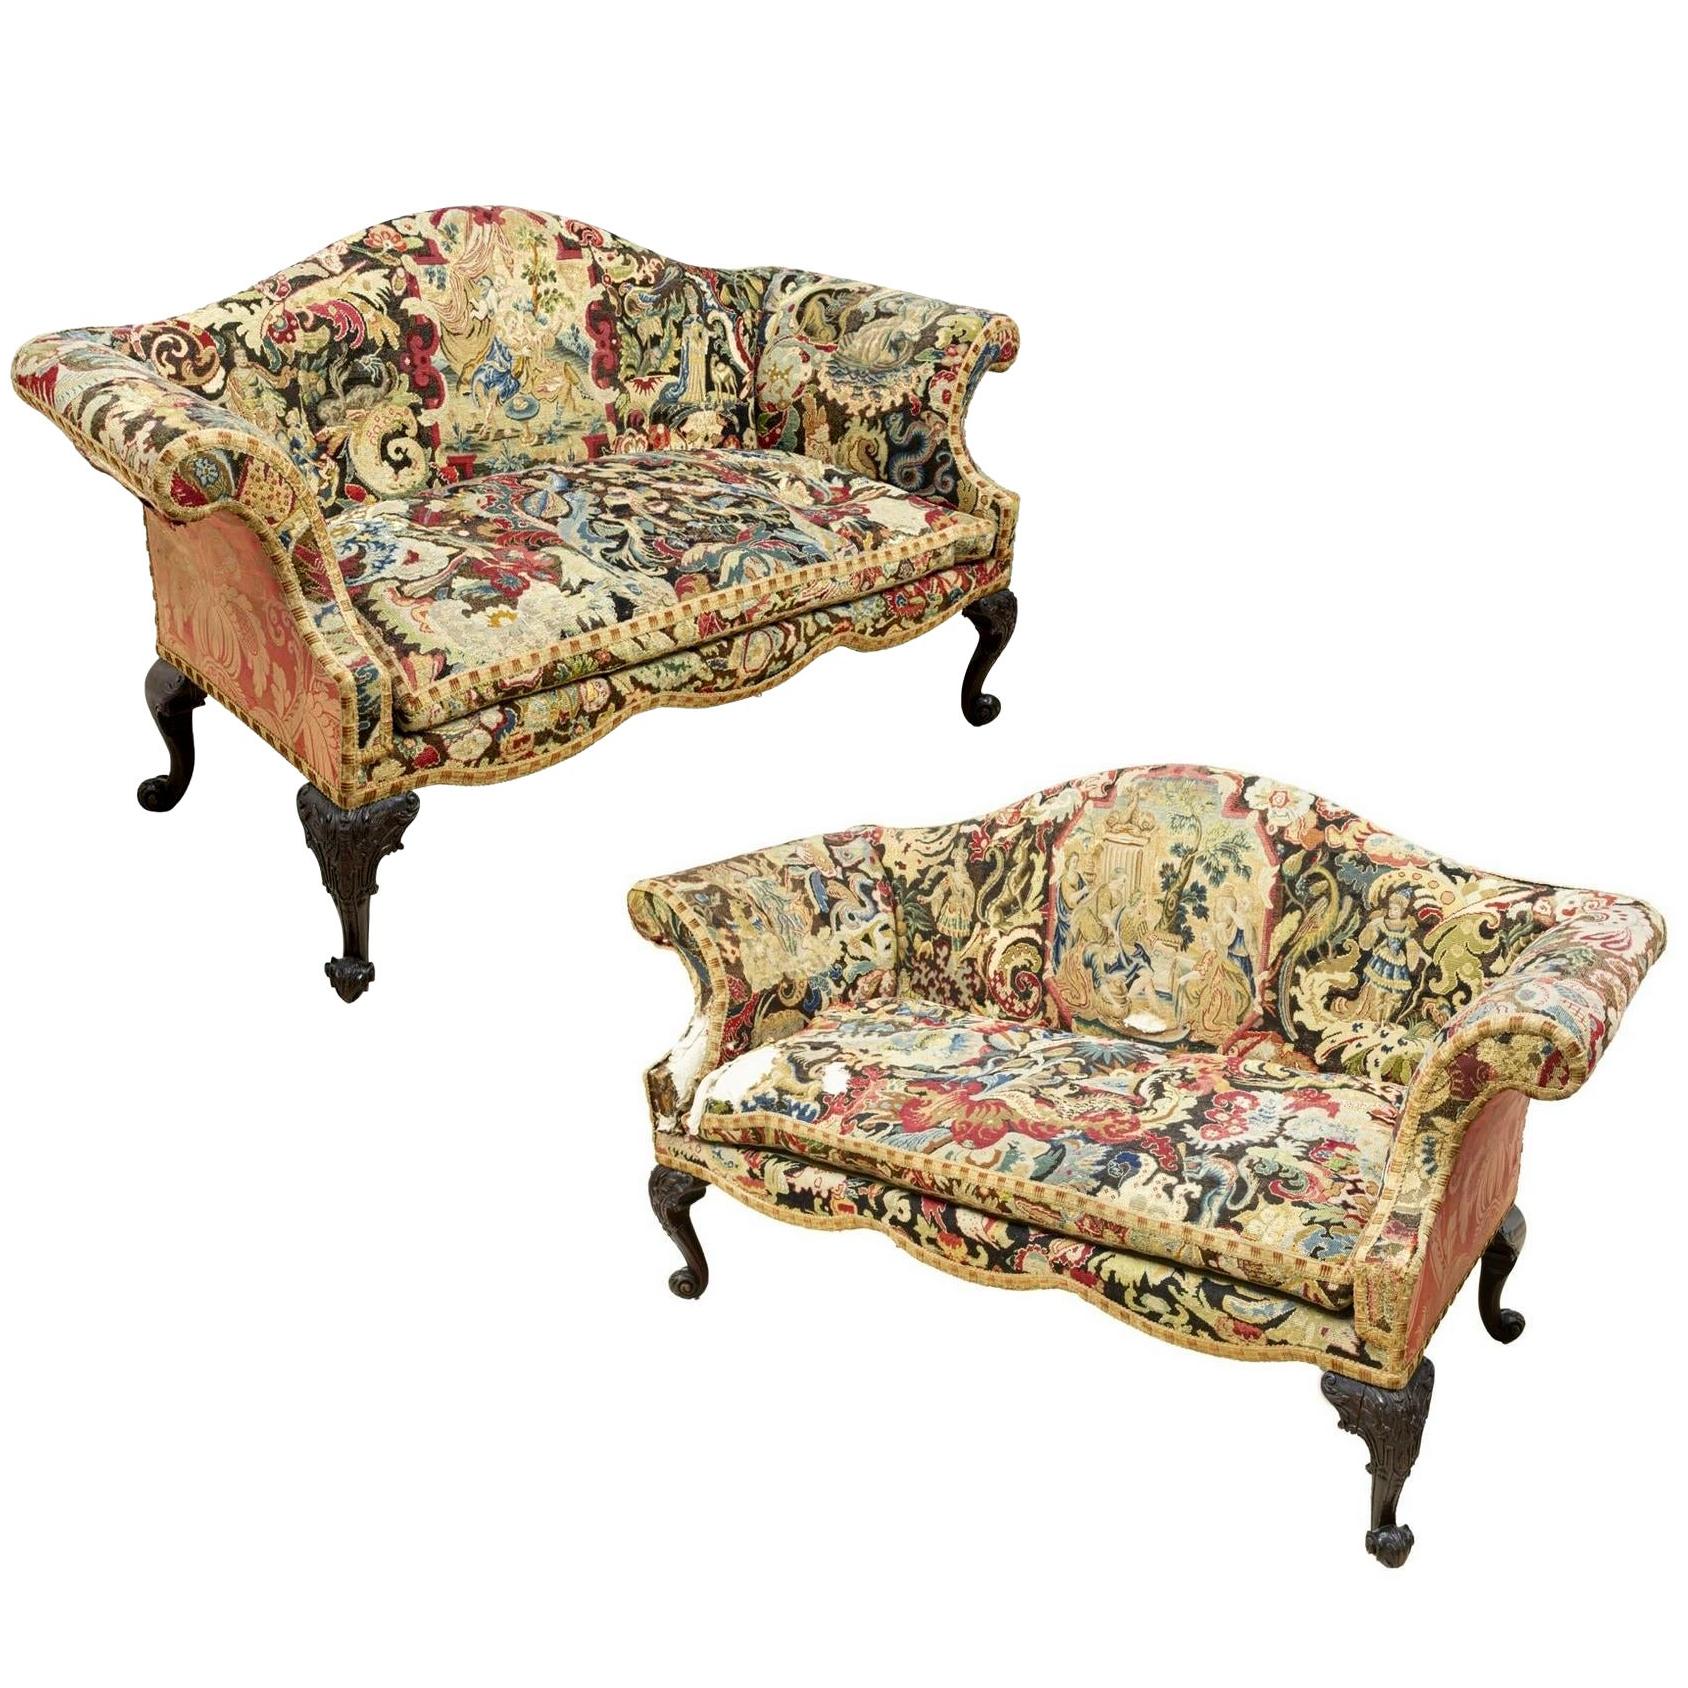 Pair of 18th Century Georgian Chippendale Sofas with Early Needlework